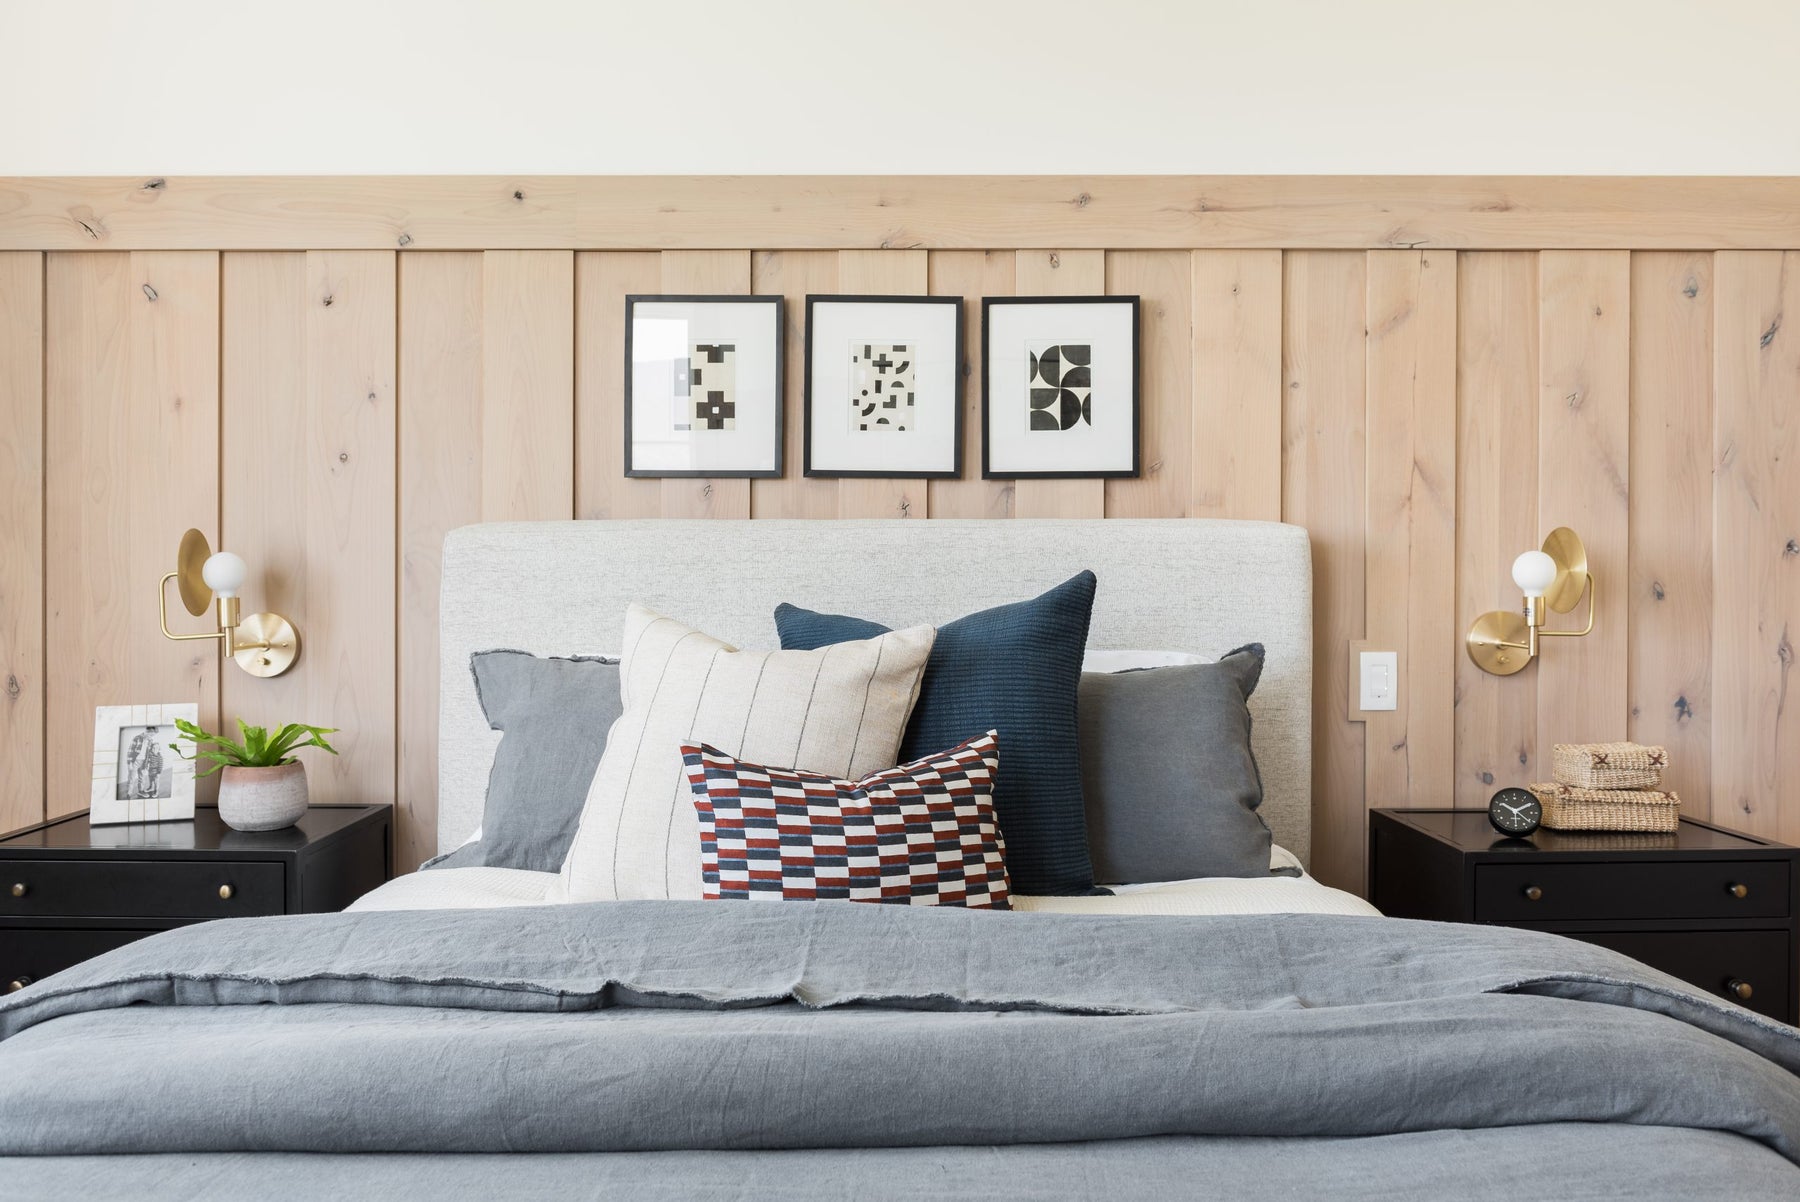 3 WAYS TO DECORATE THE AREA ABOVE YOUR BED - HYGGE CAVE